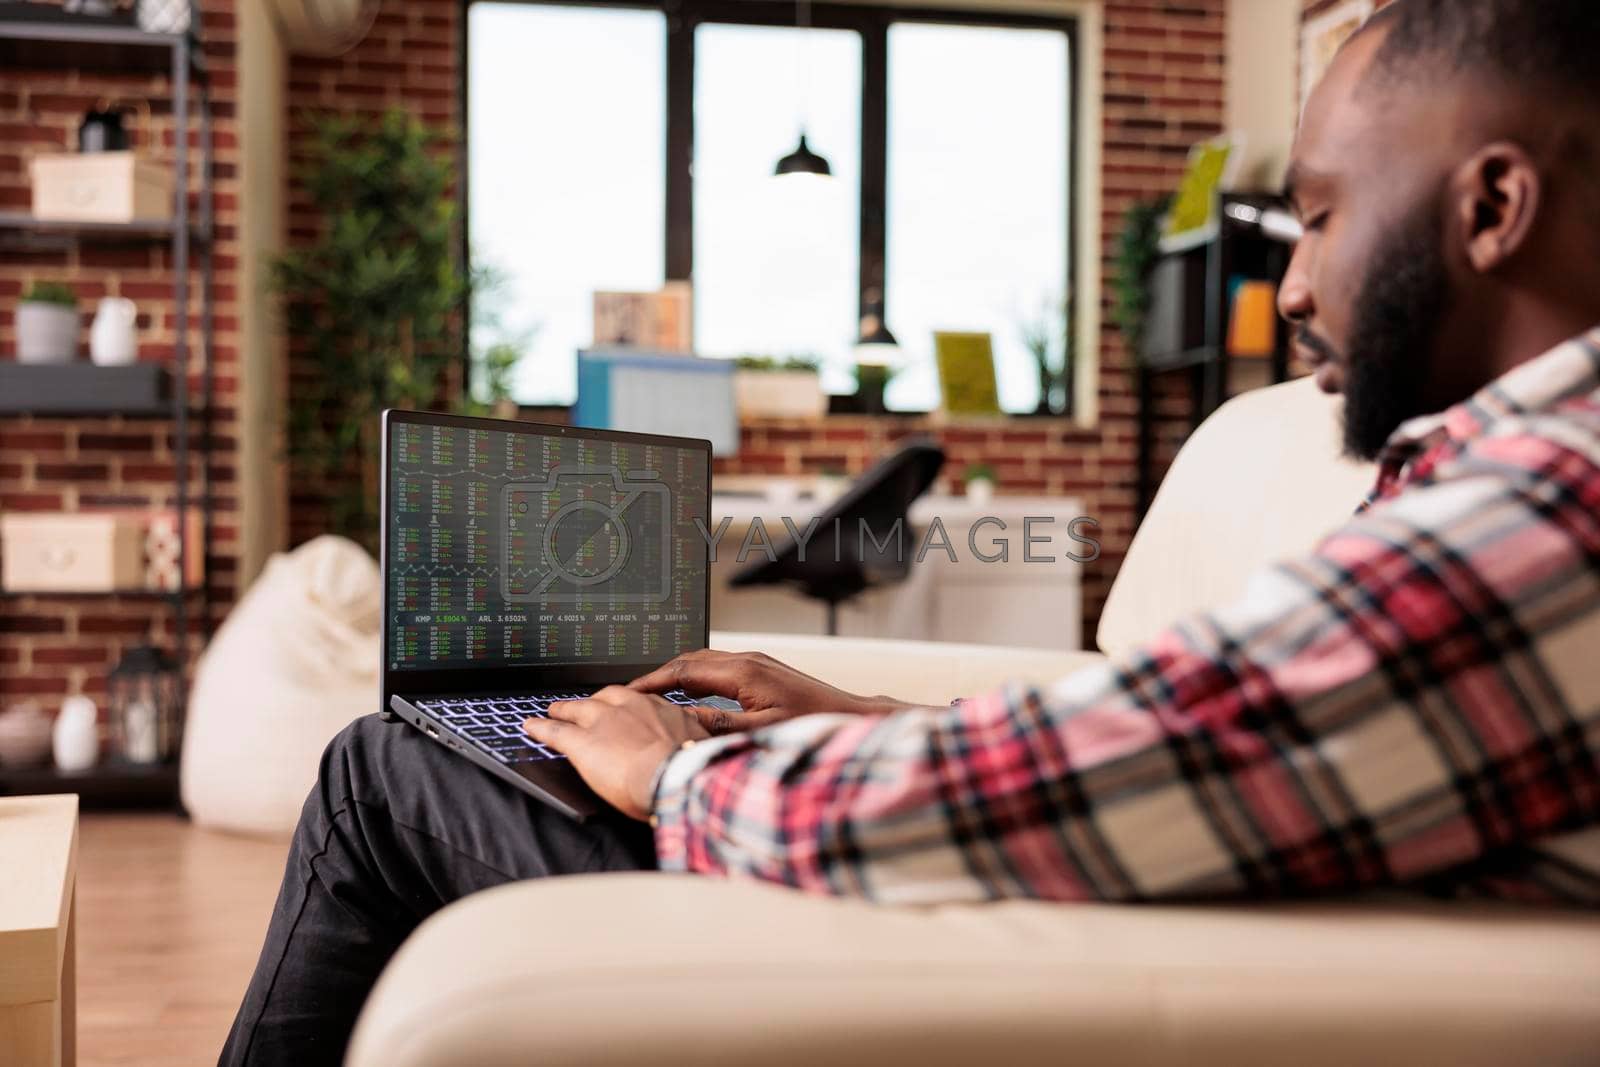 Royalty free image of Financial analyst looking at stock market statistics by DCStudio